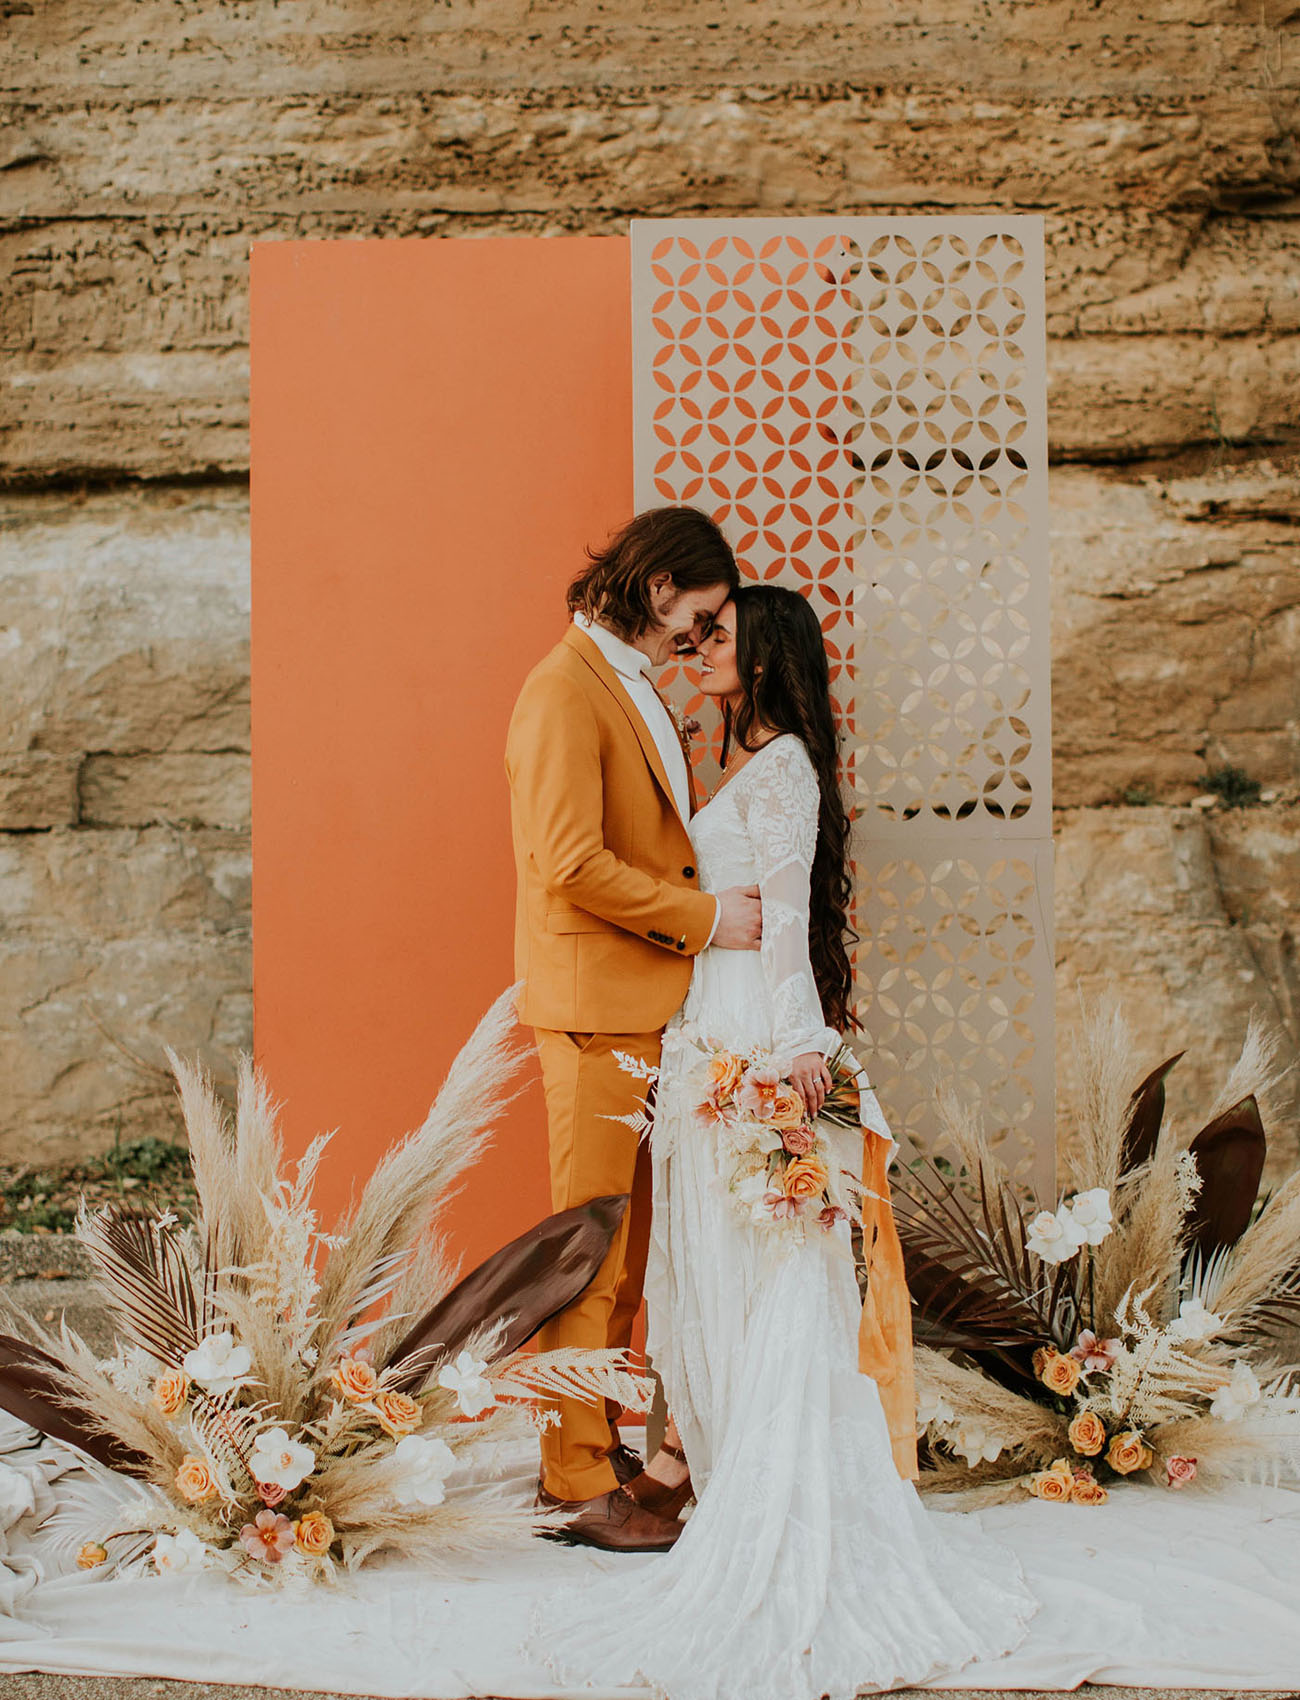 A creative 70s inspired wedding backdrop of an orange and a neutrla laser cut screen, dried fronds, leaves and blooms